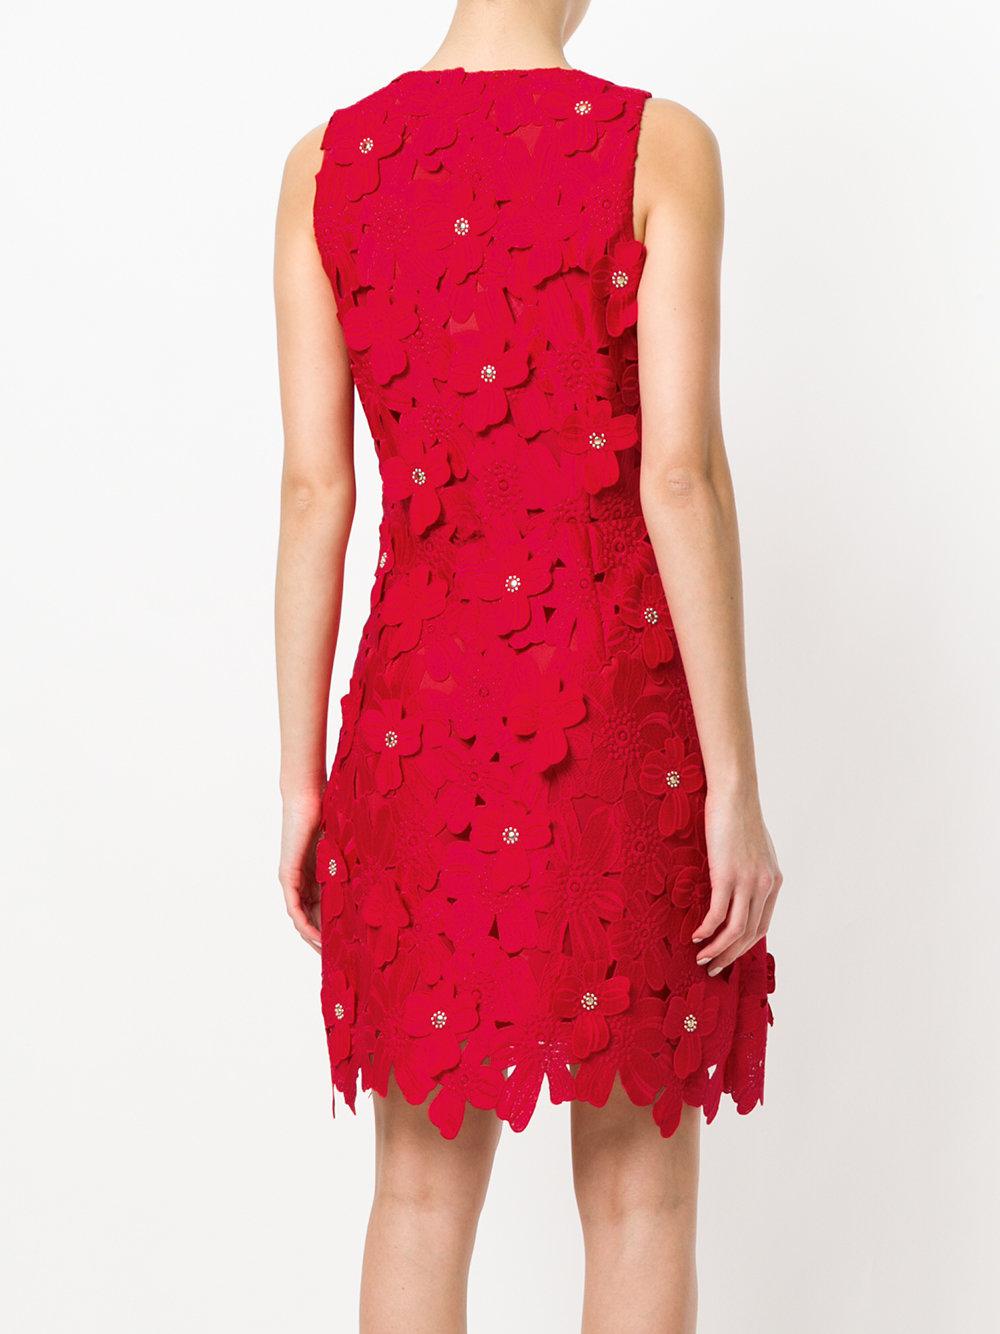 MICHAEL Michael Kors Floral Appliqué Lace Dress in Red | Lyst Canada